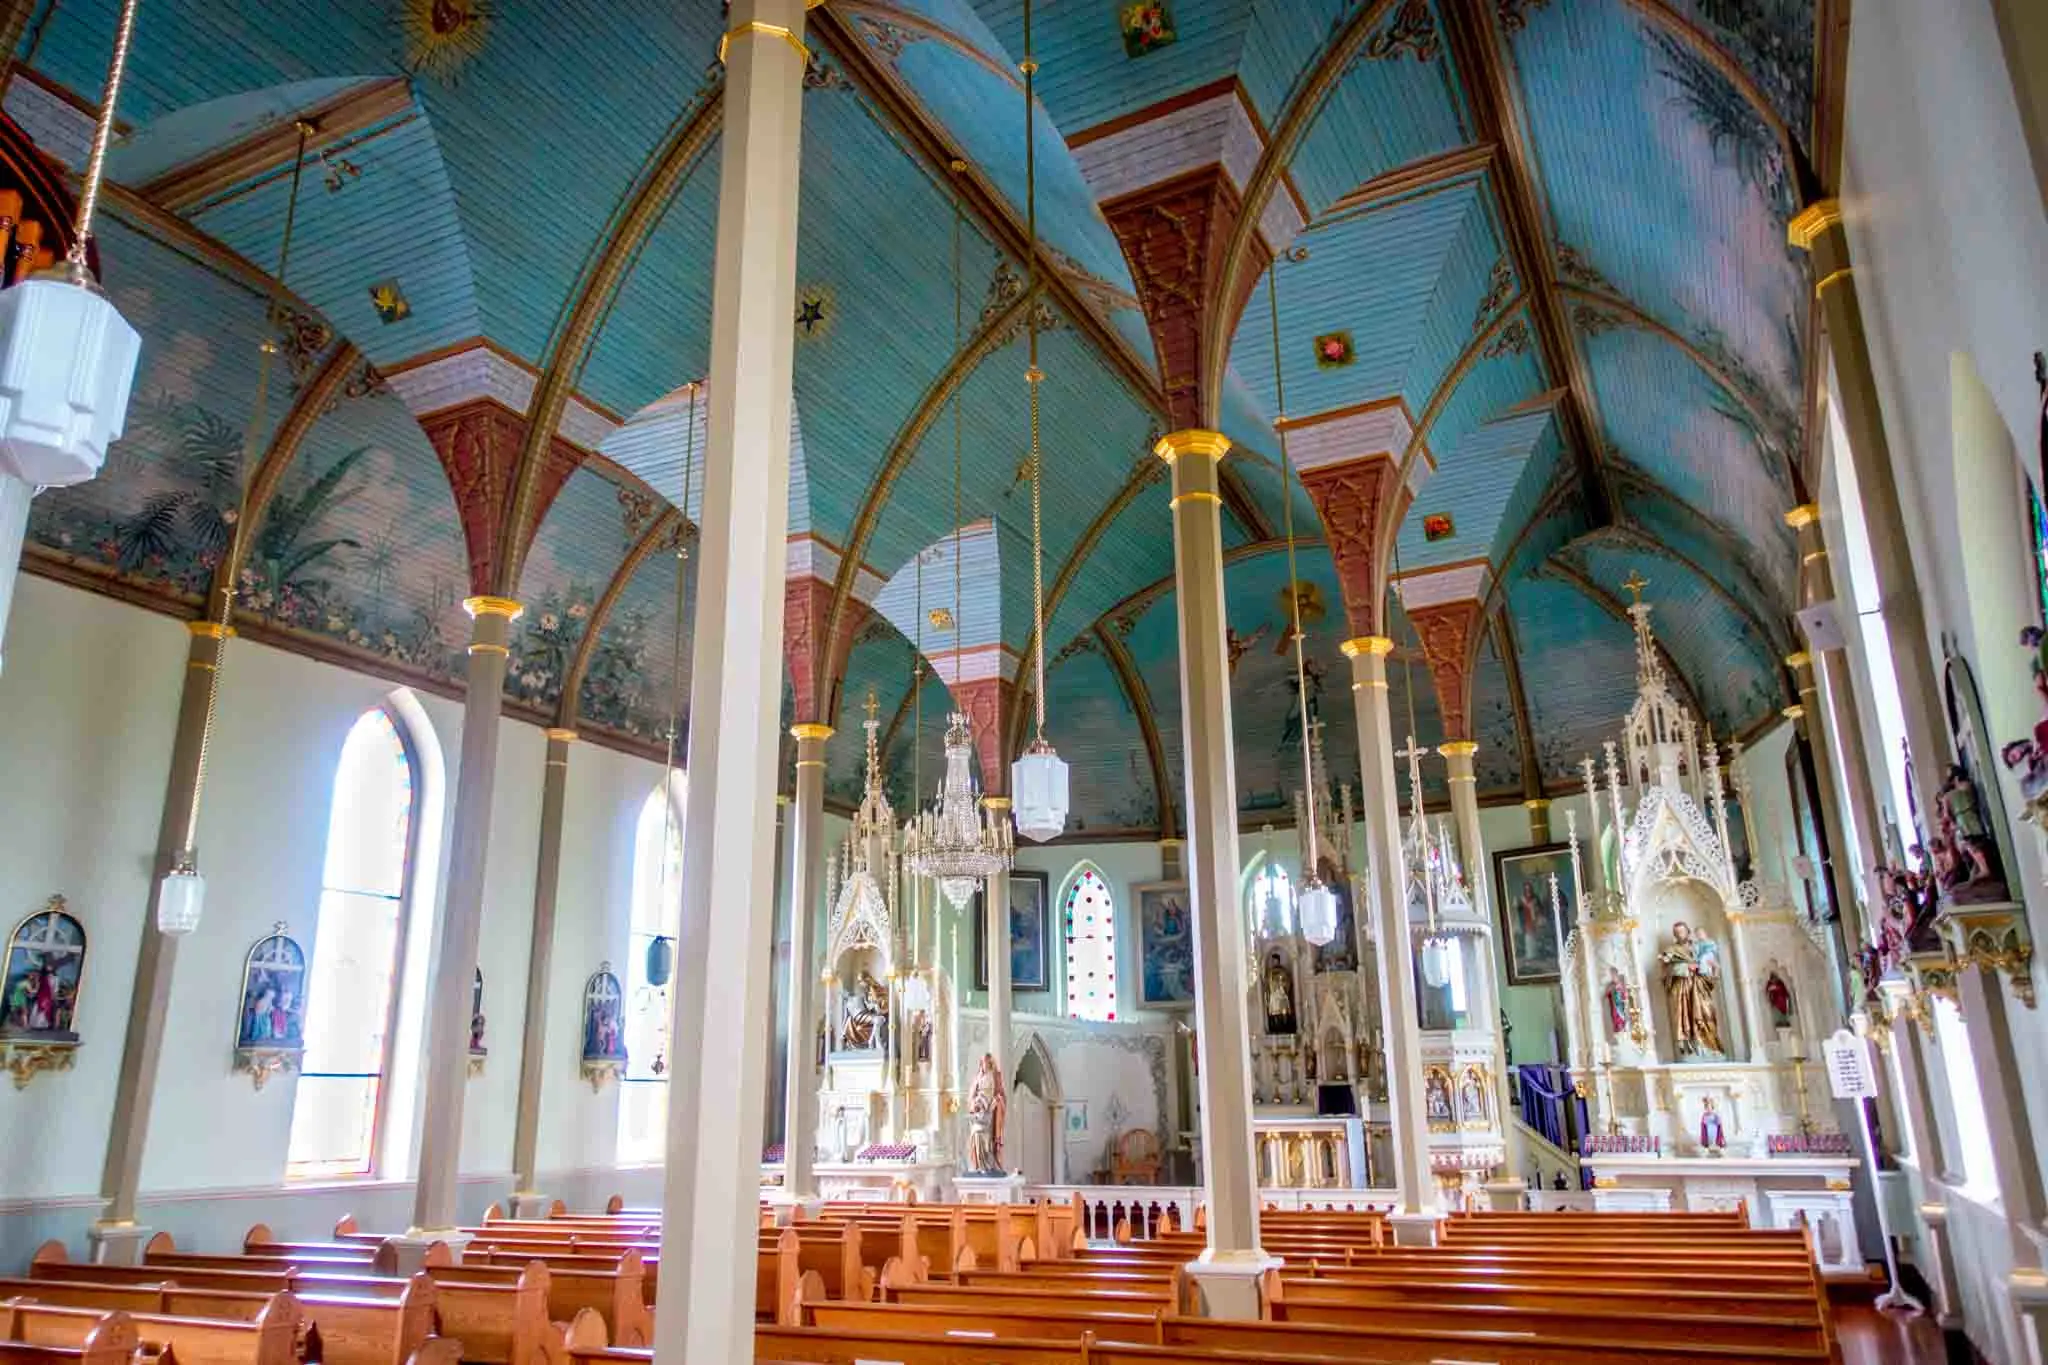 Sanctuary with a turquoise ceiling